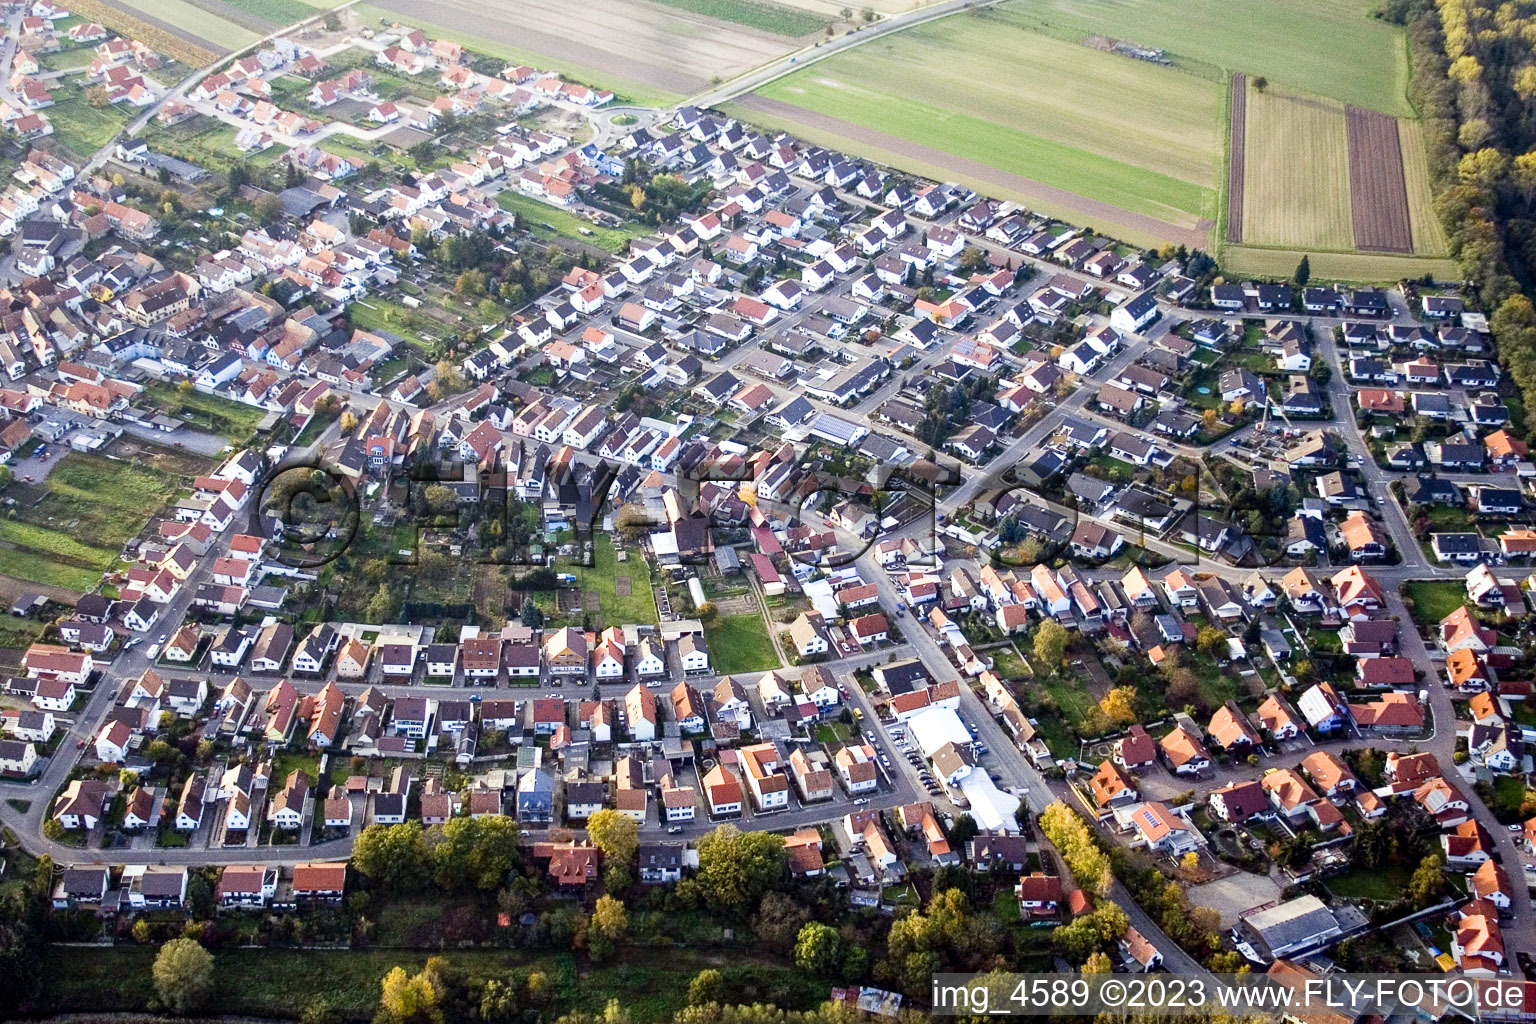 Aerial view of From the east in Hördt in the state Rhineland-Palatinate, Germany